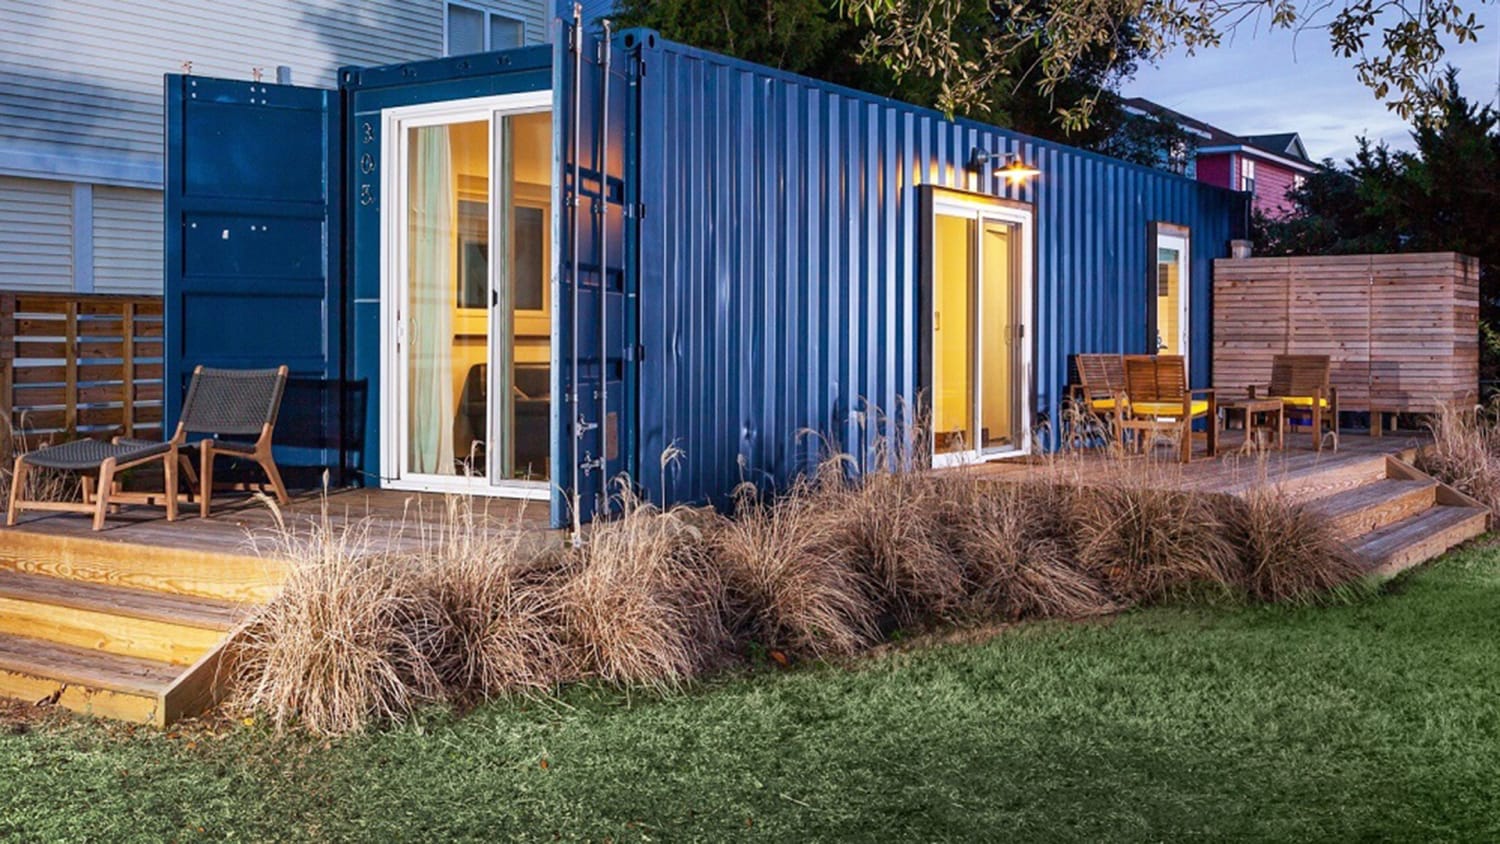 Artistic Expression: Shipping Containers as Creative Studio Spaces